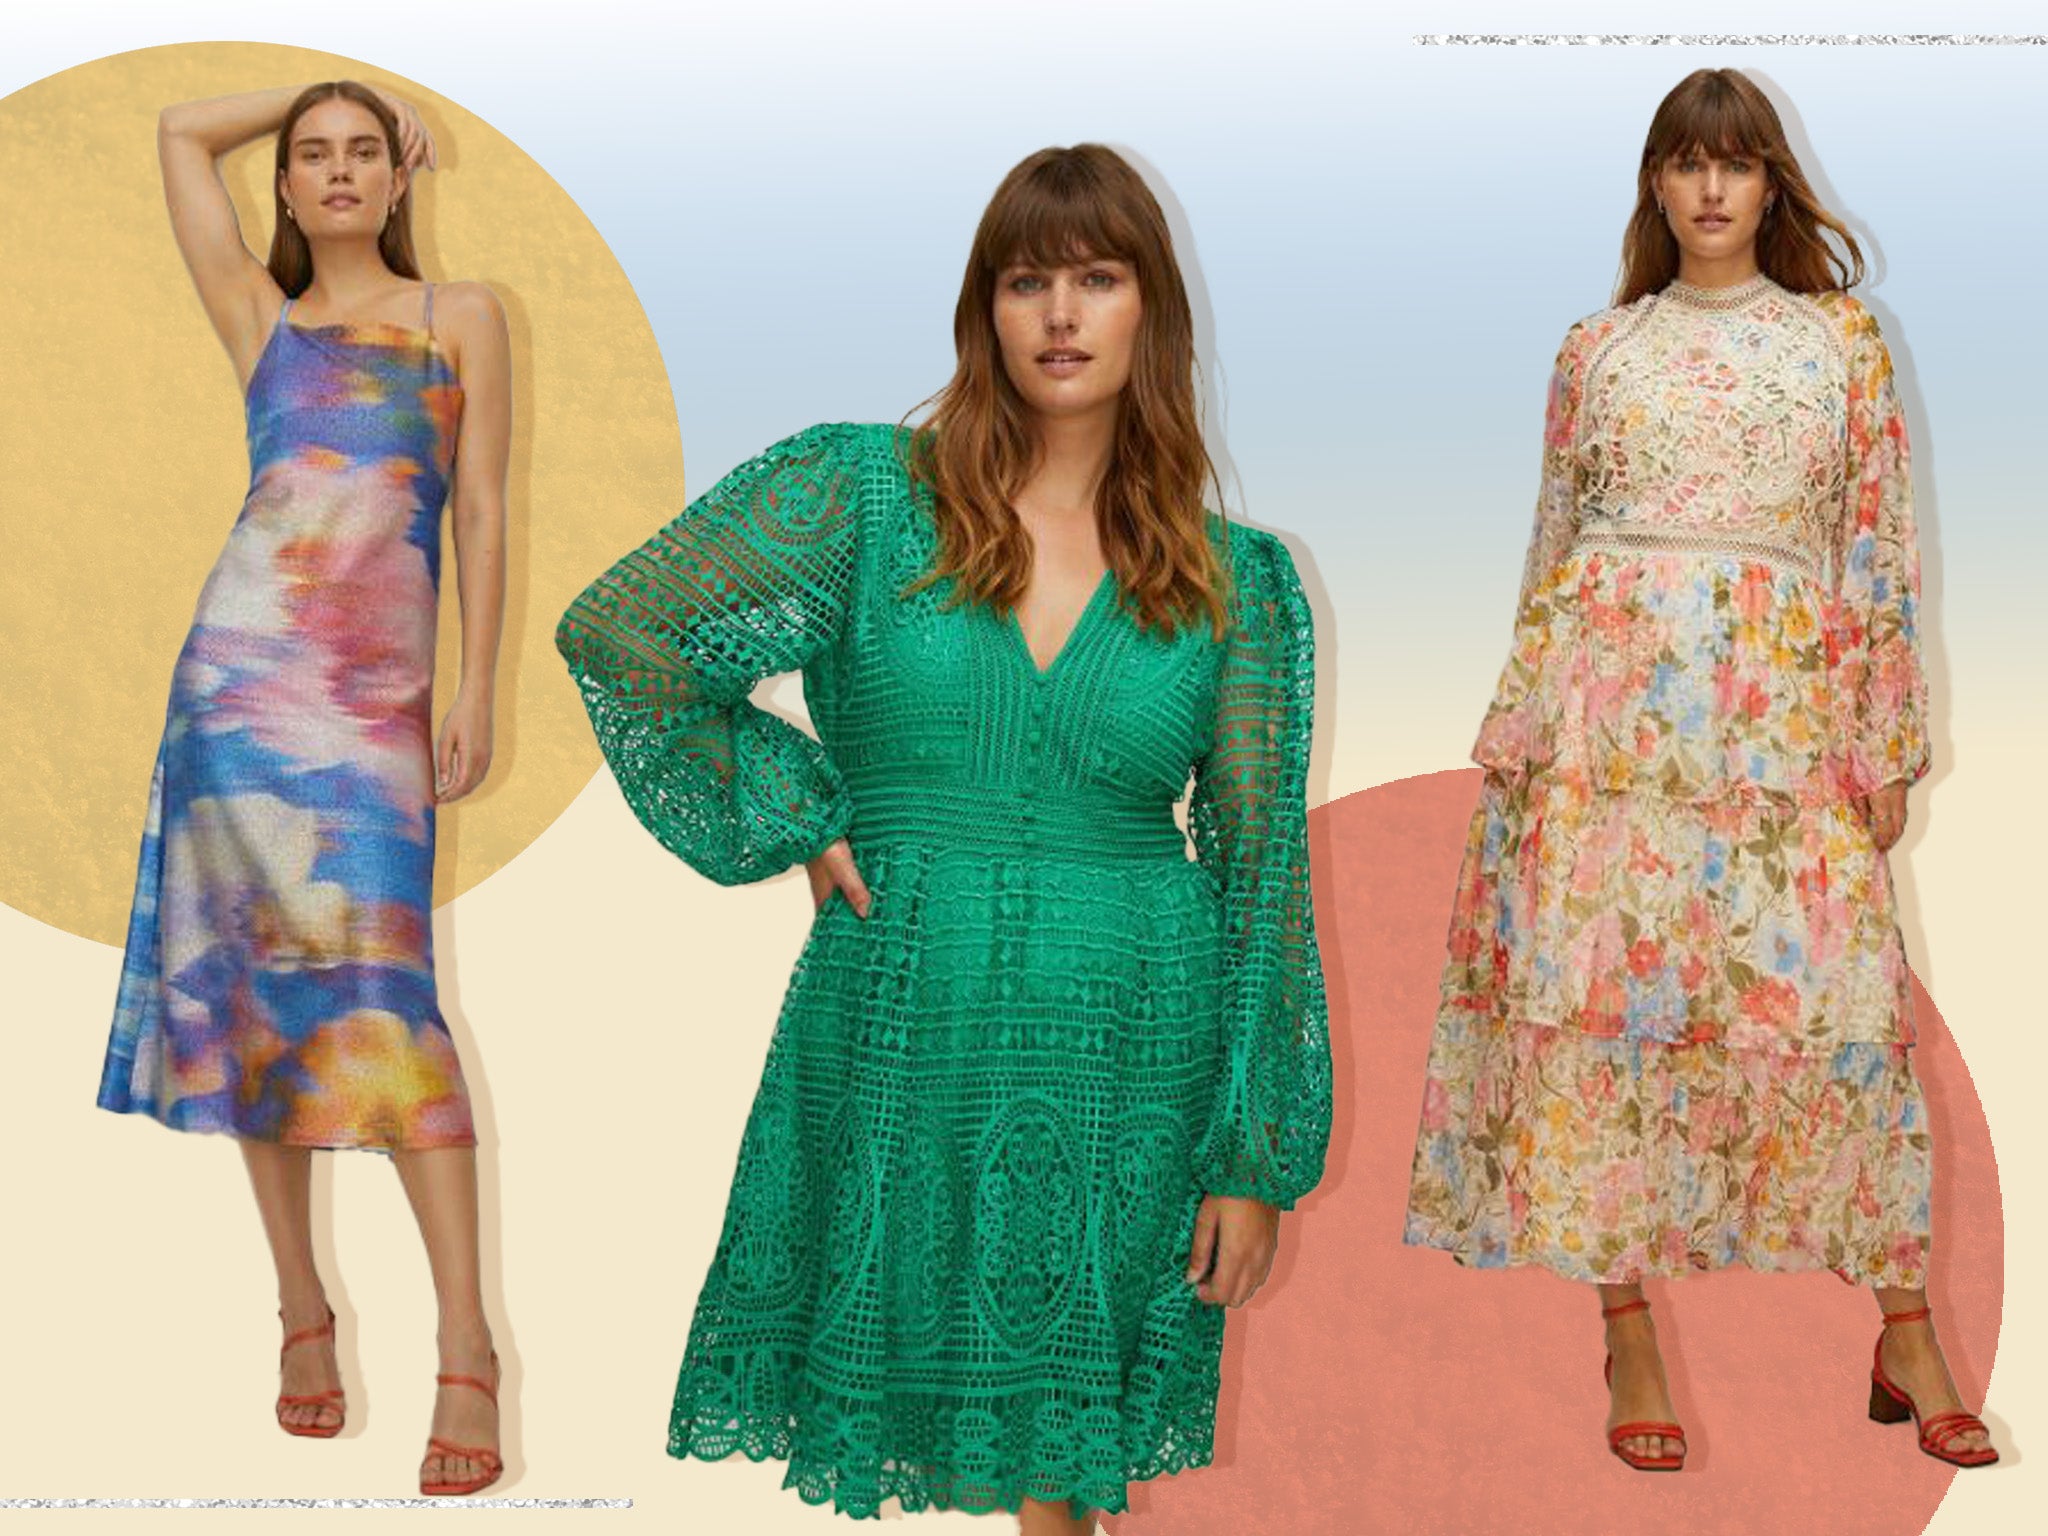 From petite to plus-size, these dresses work for all ages